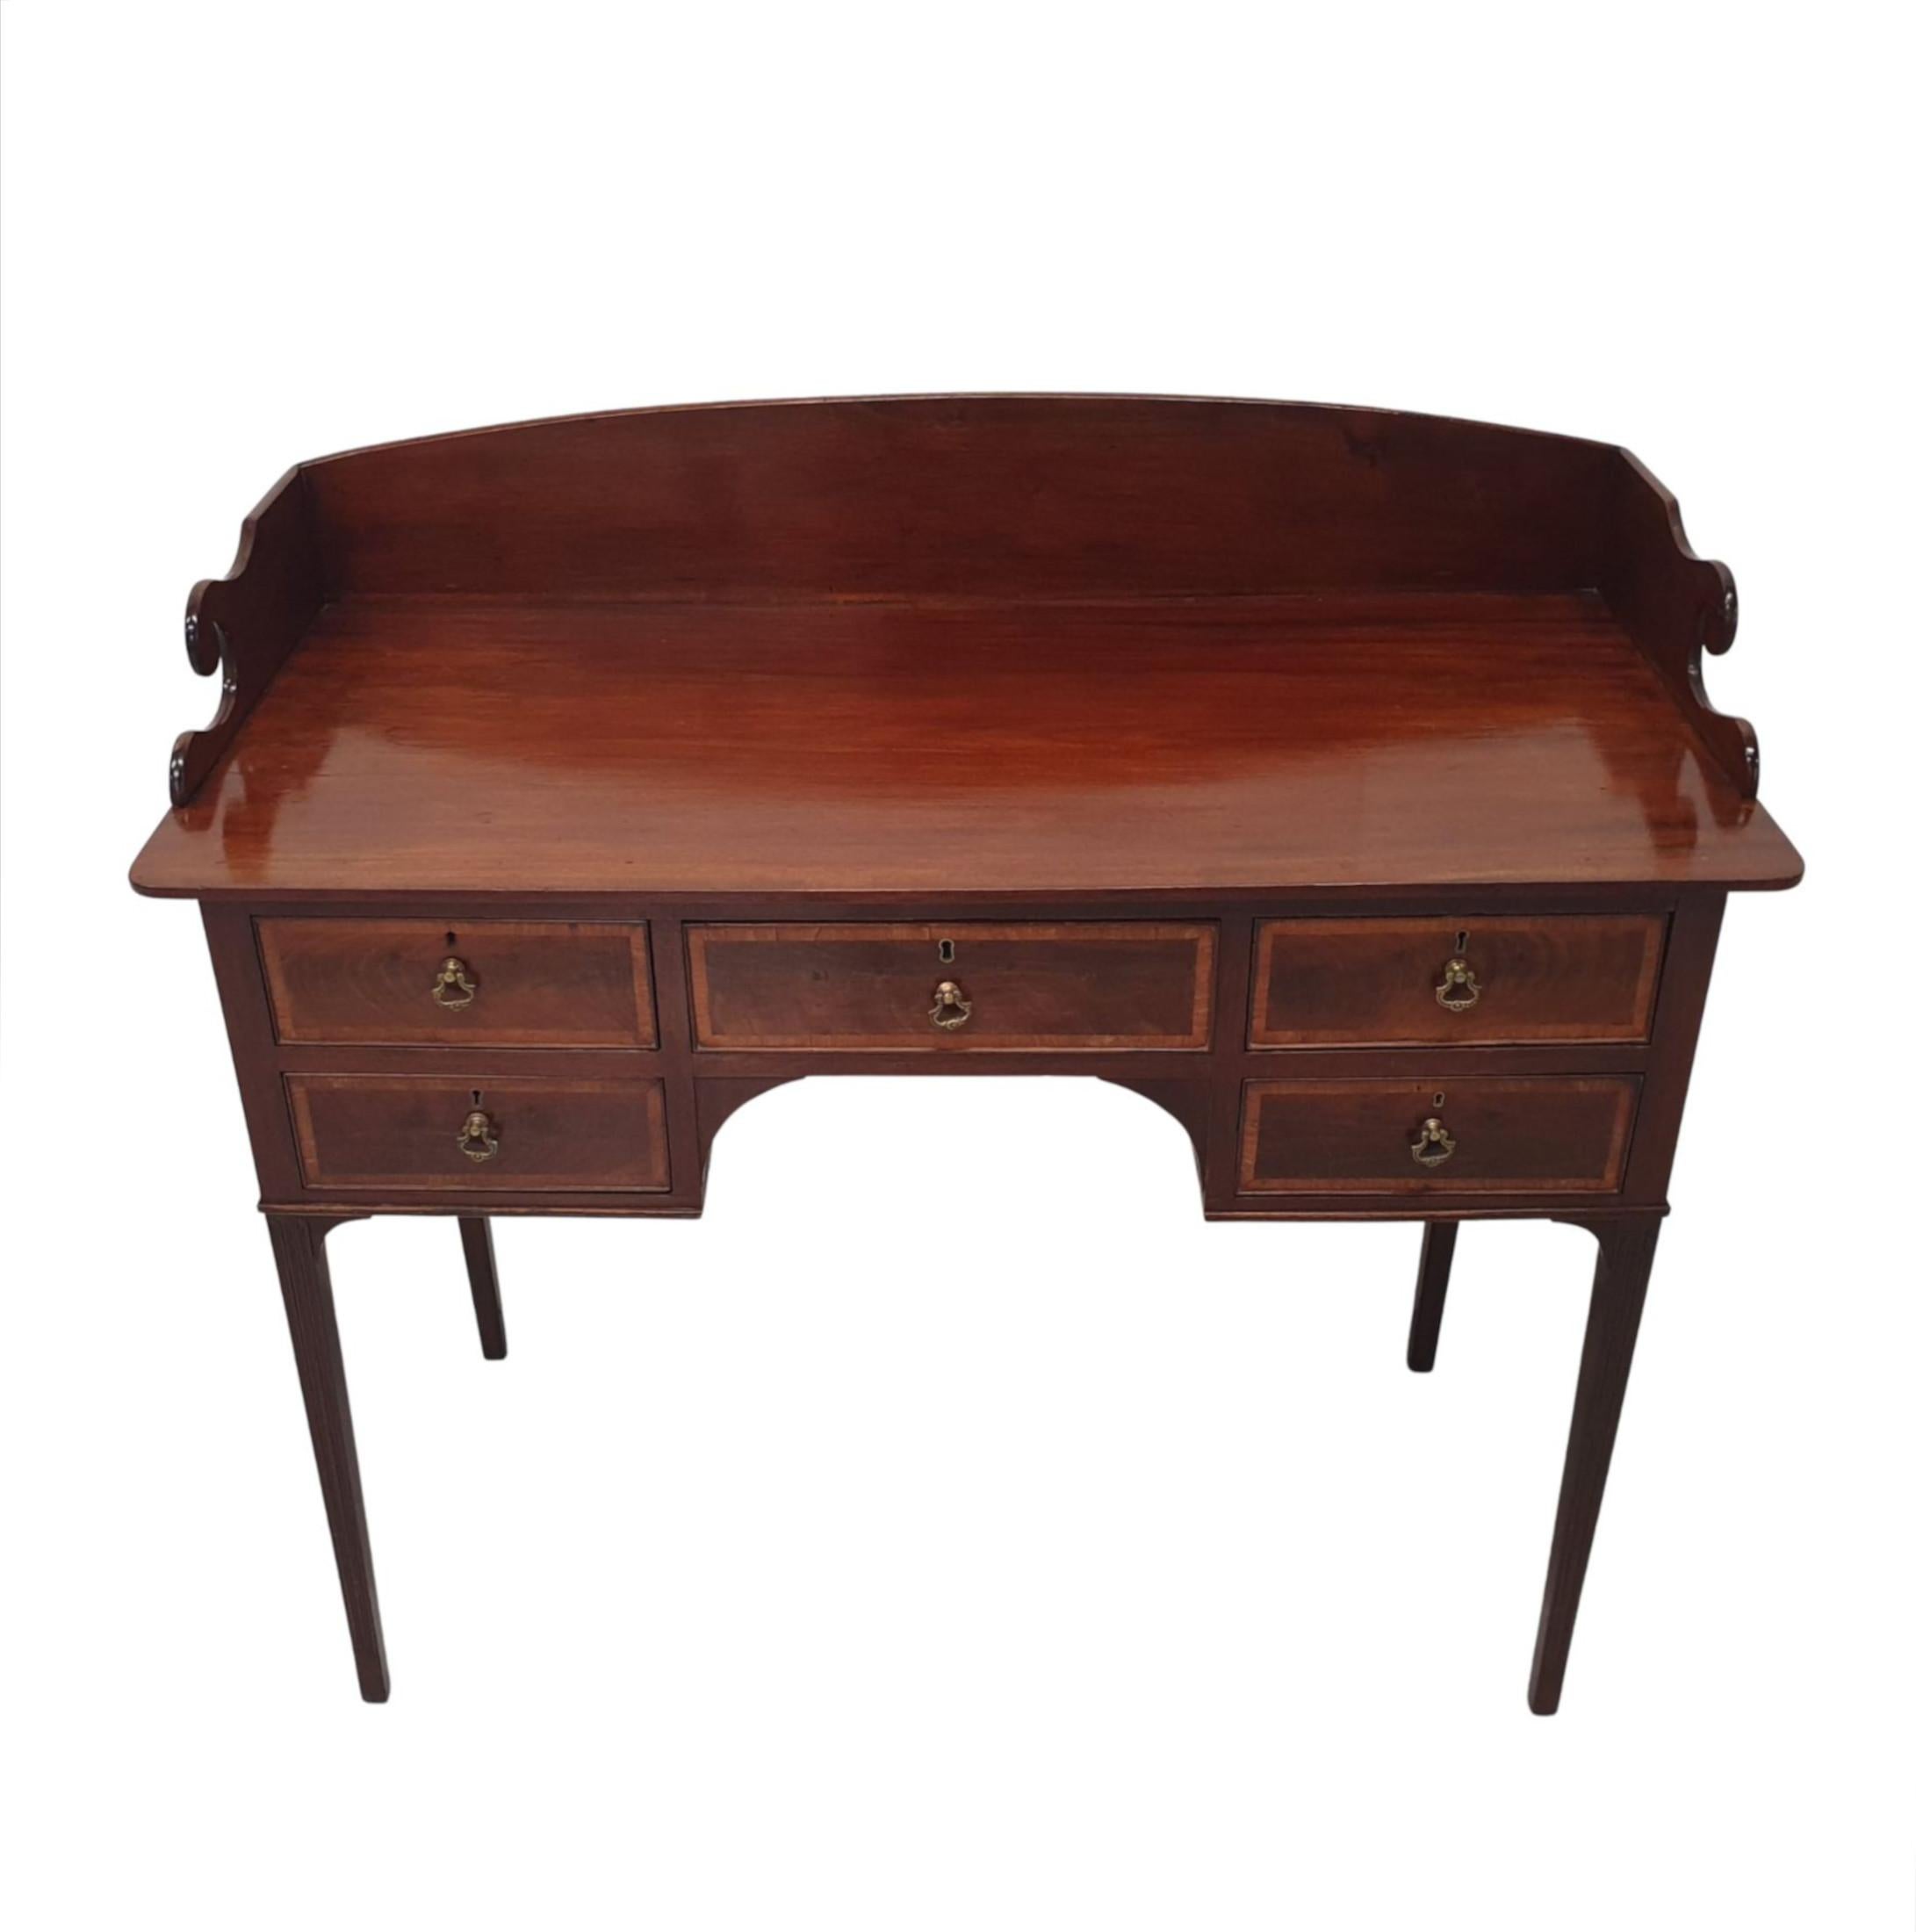 English A Fine 19th Century Inlaid Mahogany Sideboard or Hall Table For Sale